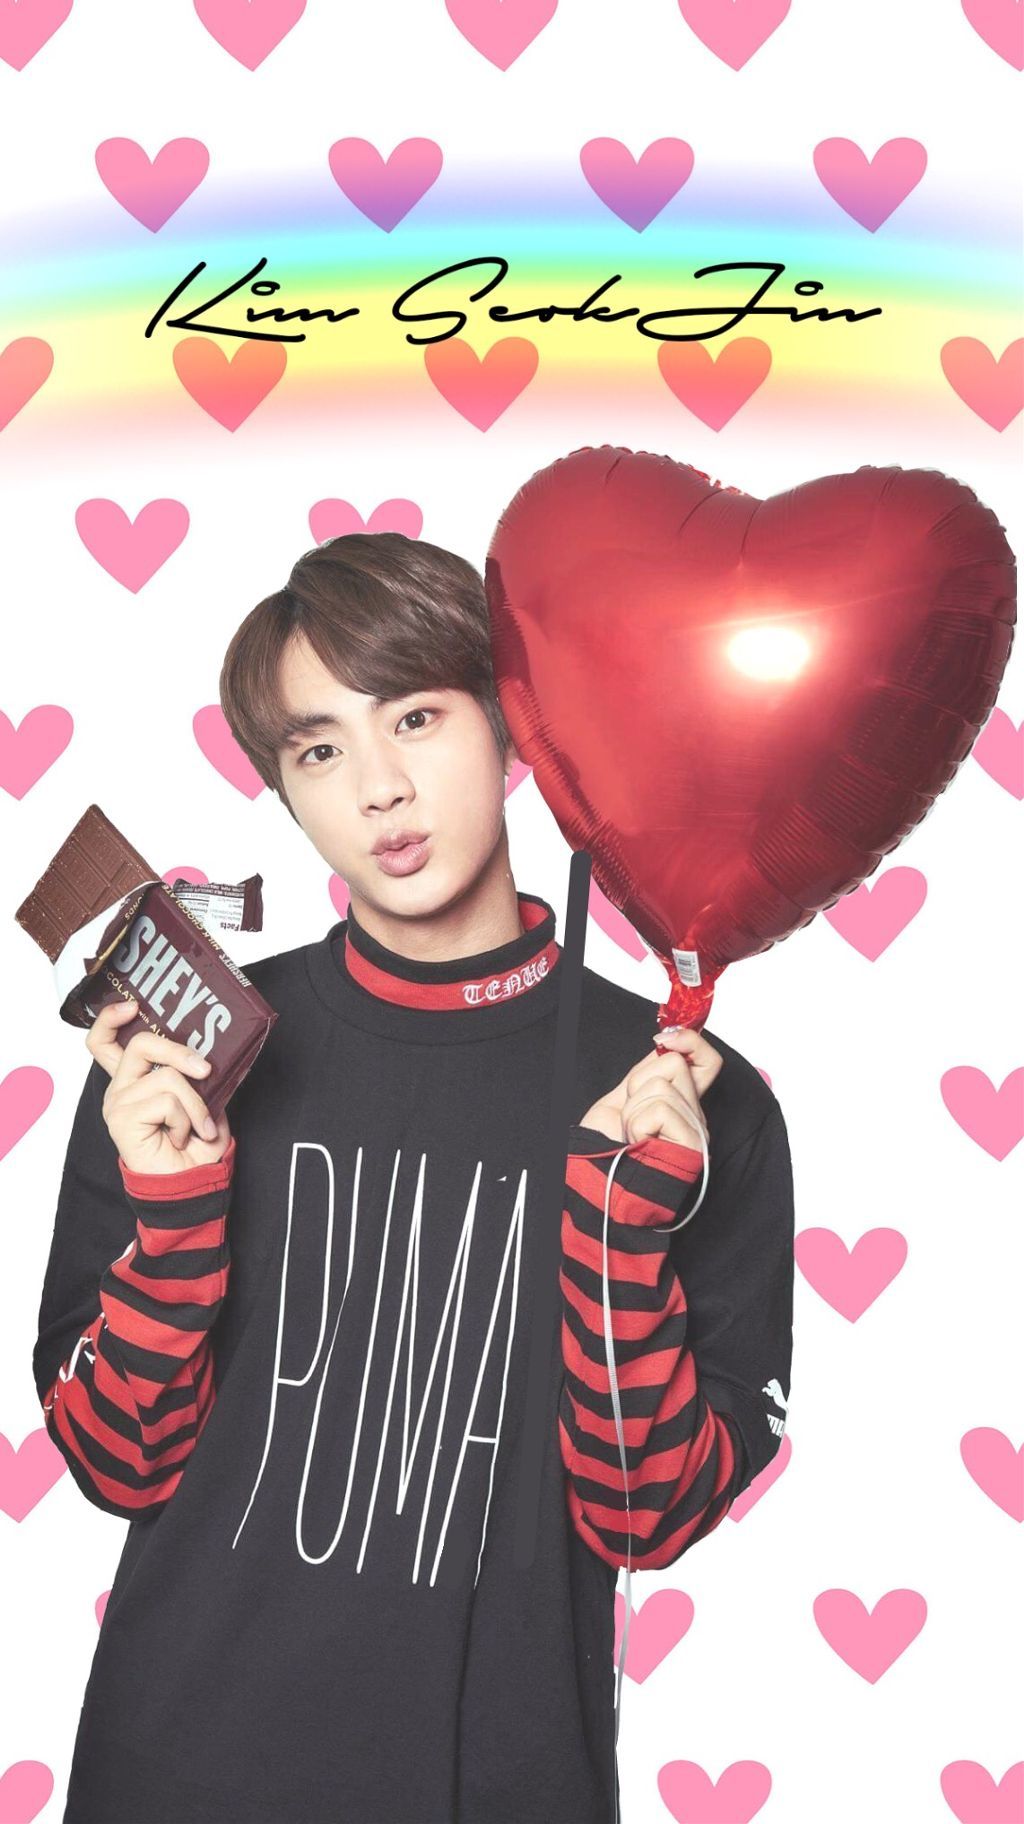 DO NOT EDIT THIS PICTURE. bts jin kimseokjin wallpaper…